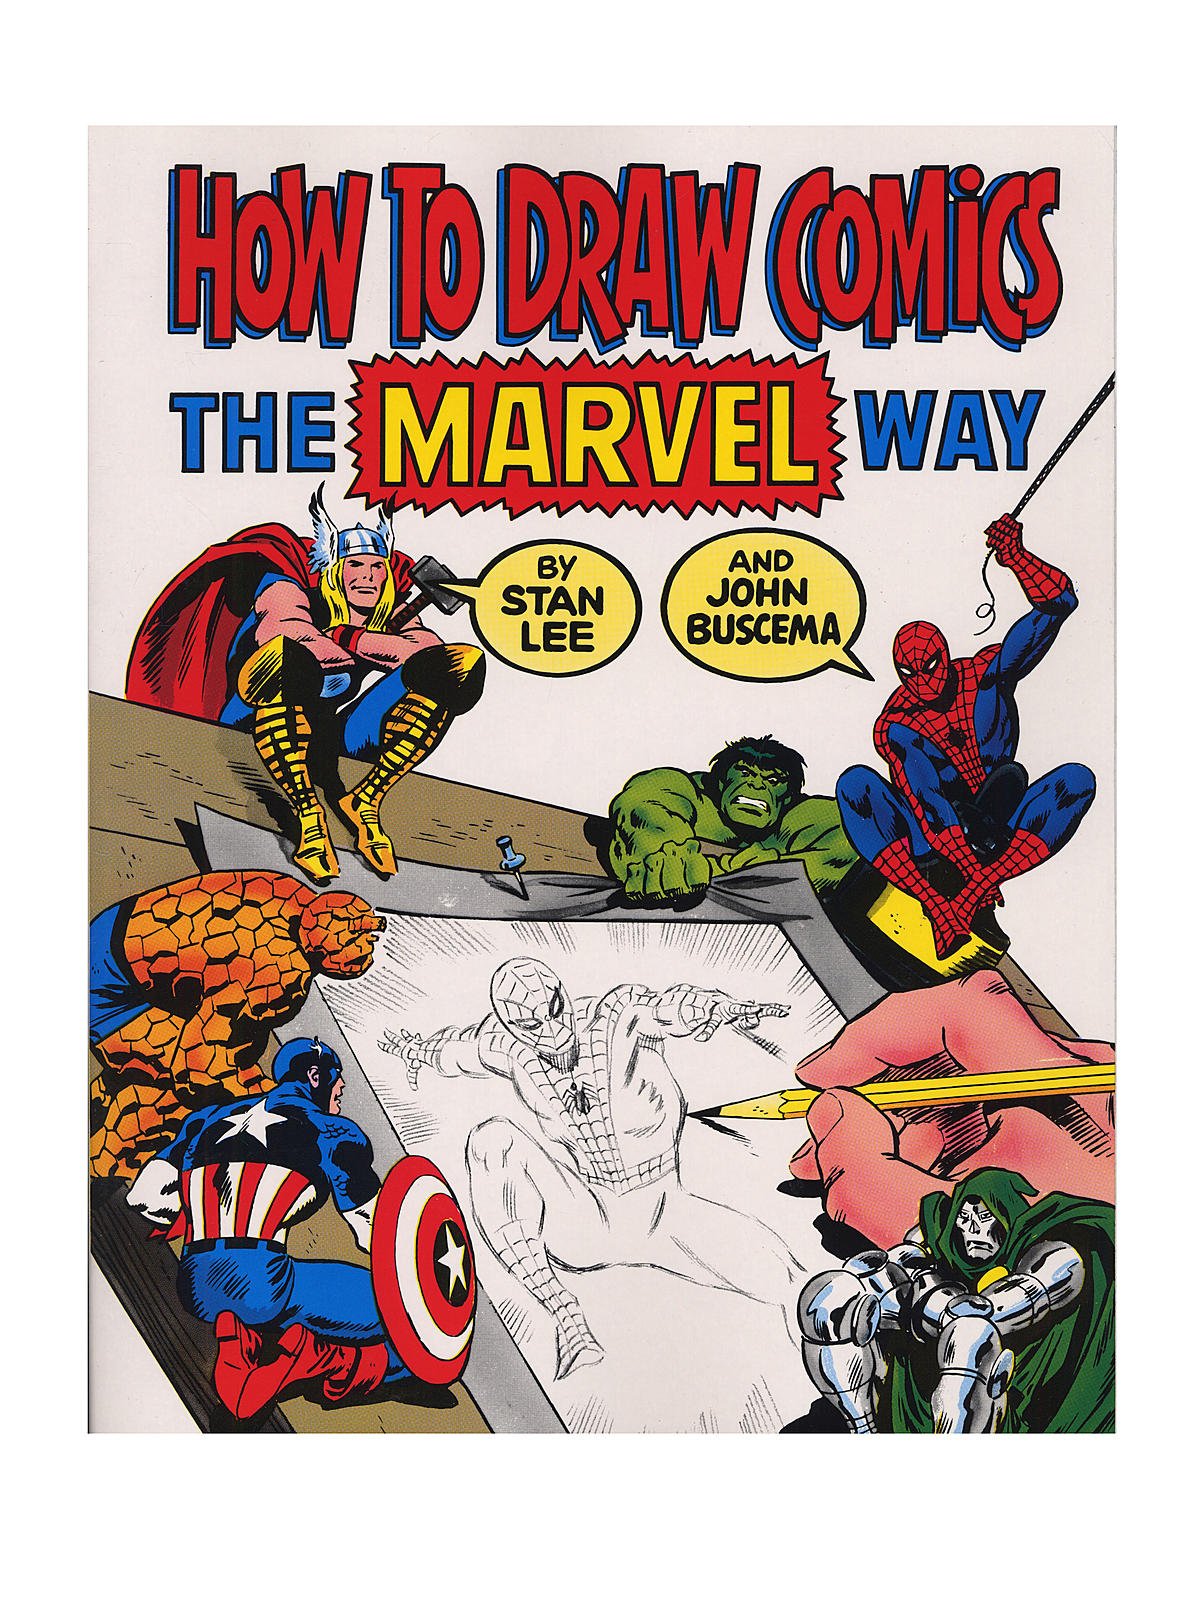 Simon & Schuster - How to Draw Comics the Marvel Way